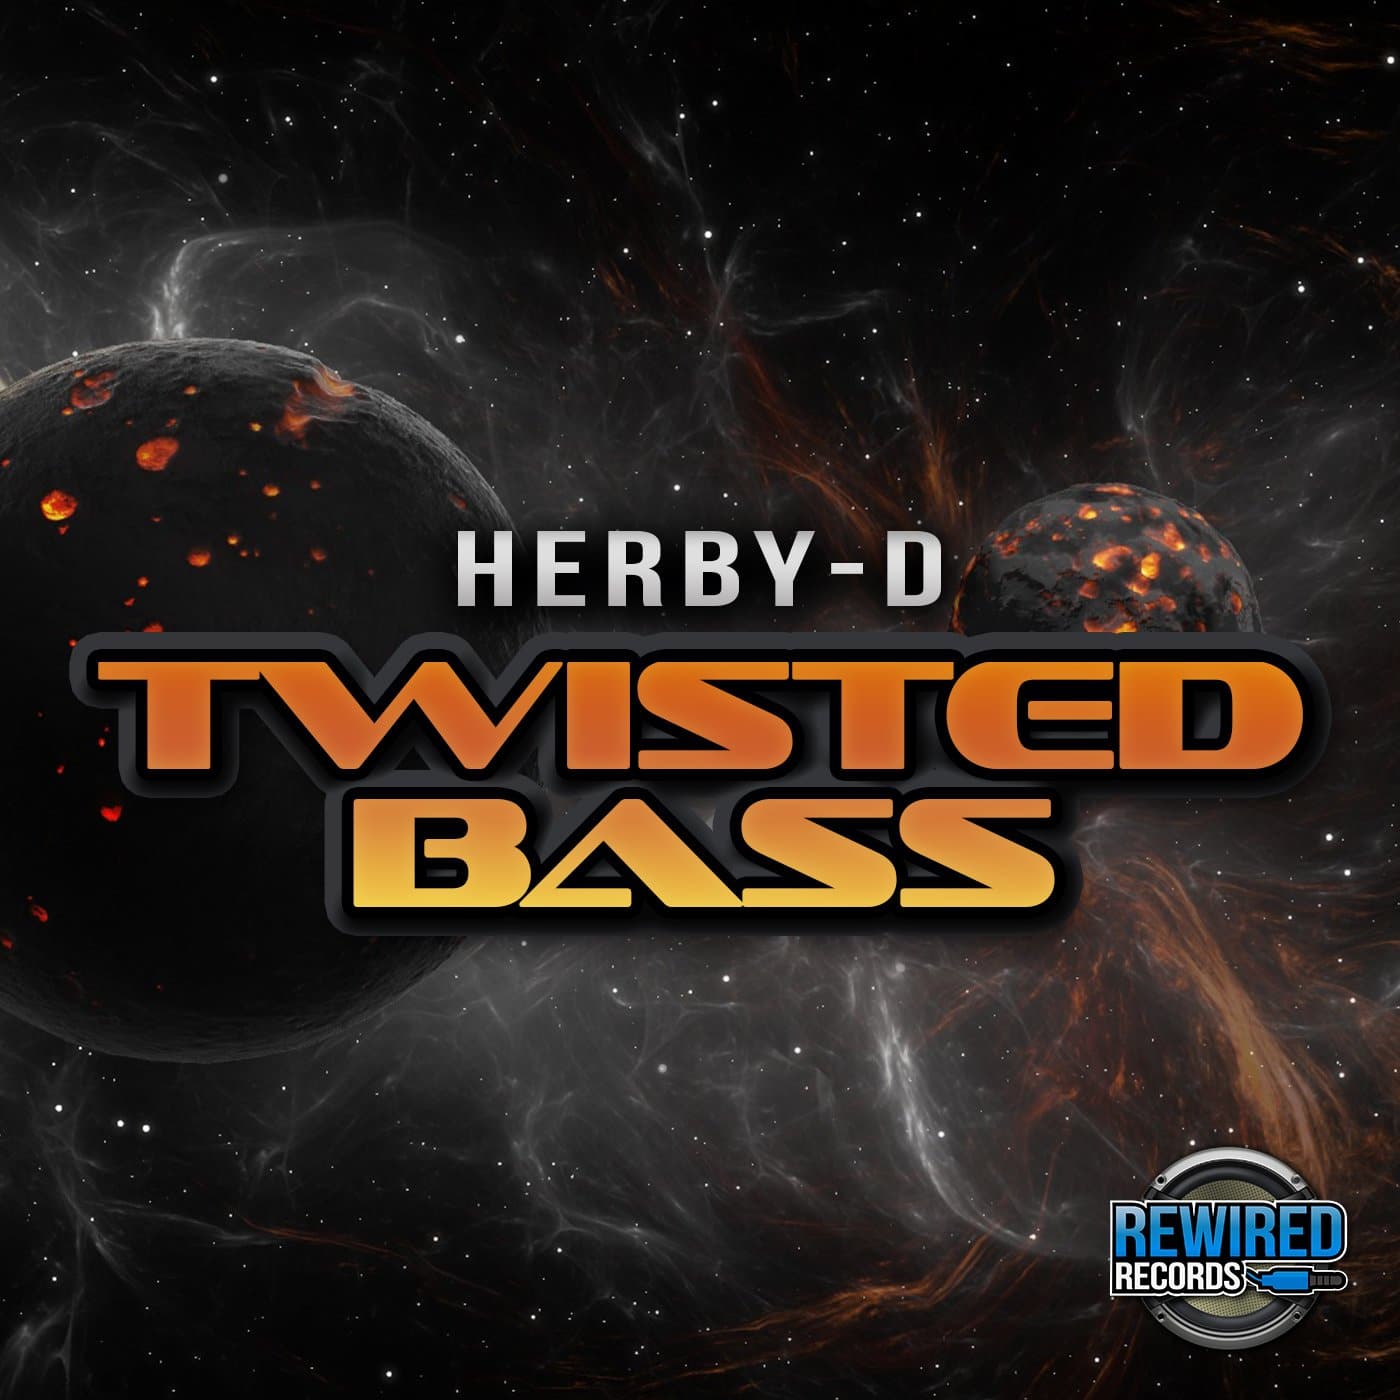 Herby-D - Twisted Bass - Rewired Records